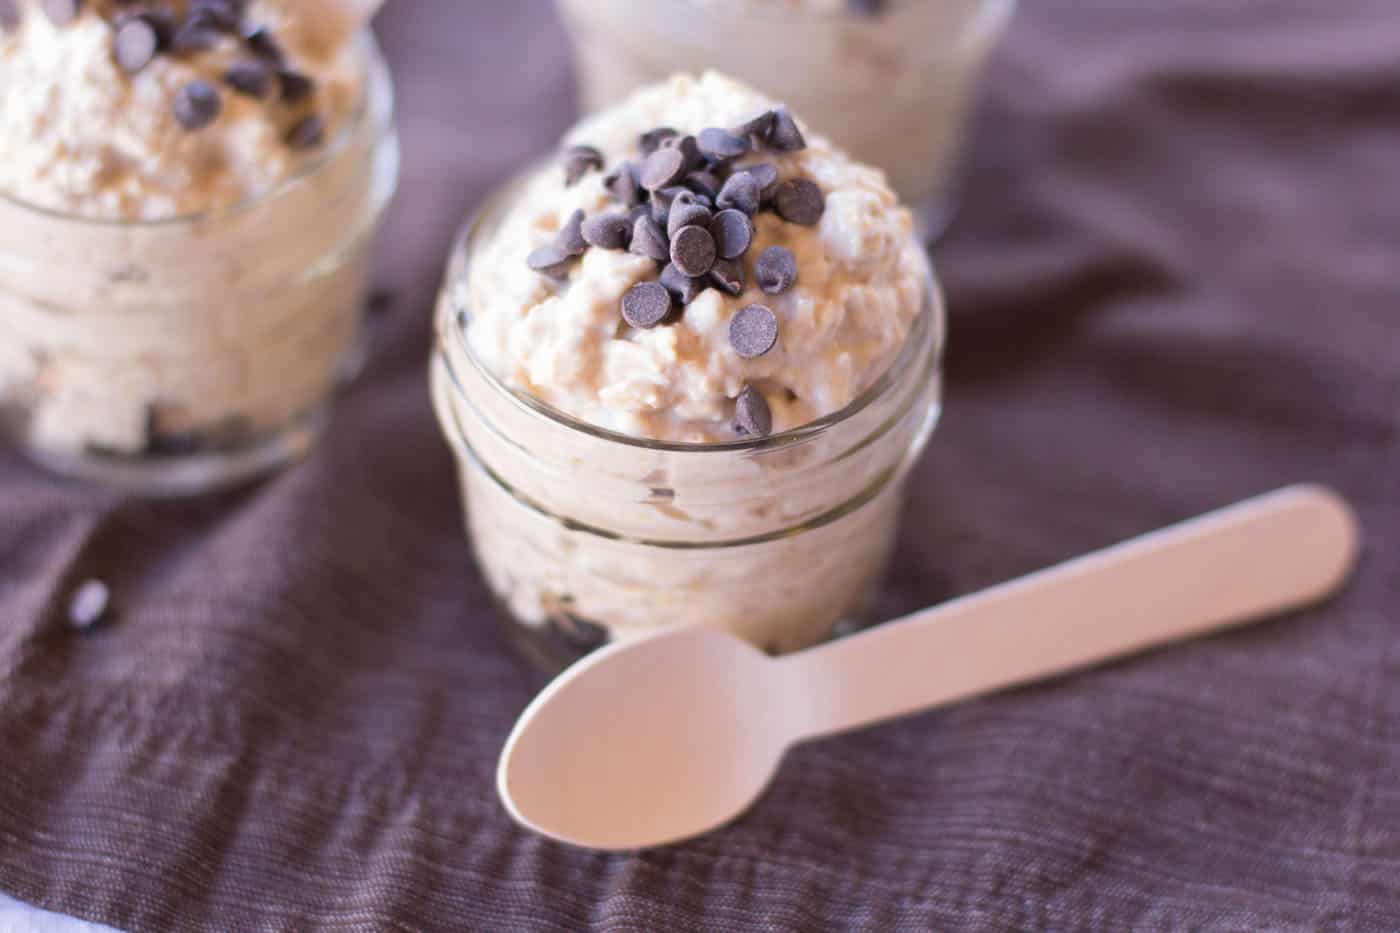 Healthy overnight oatmeal recipe - peanut butter with chocolate chips